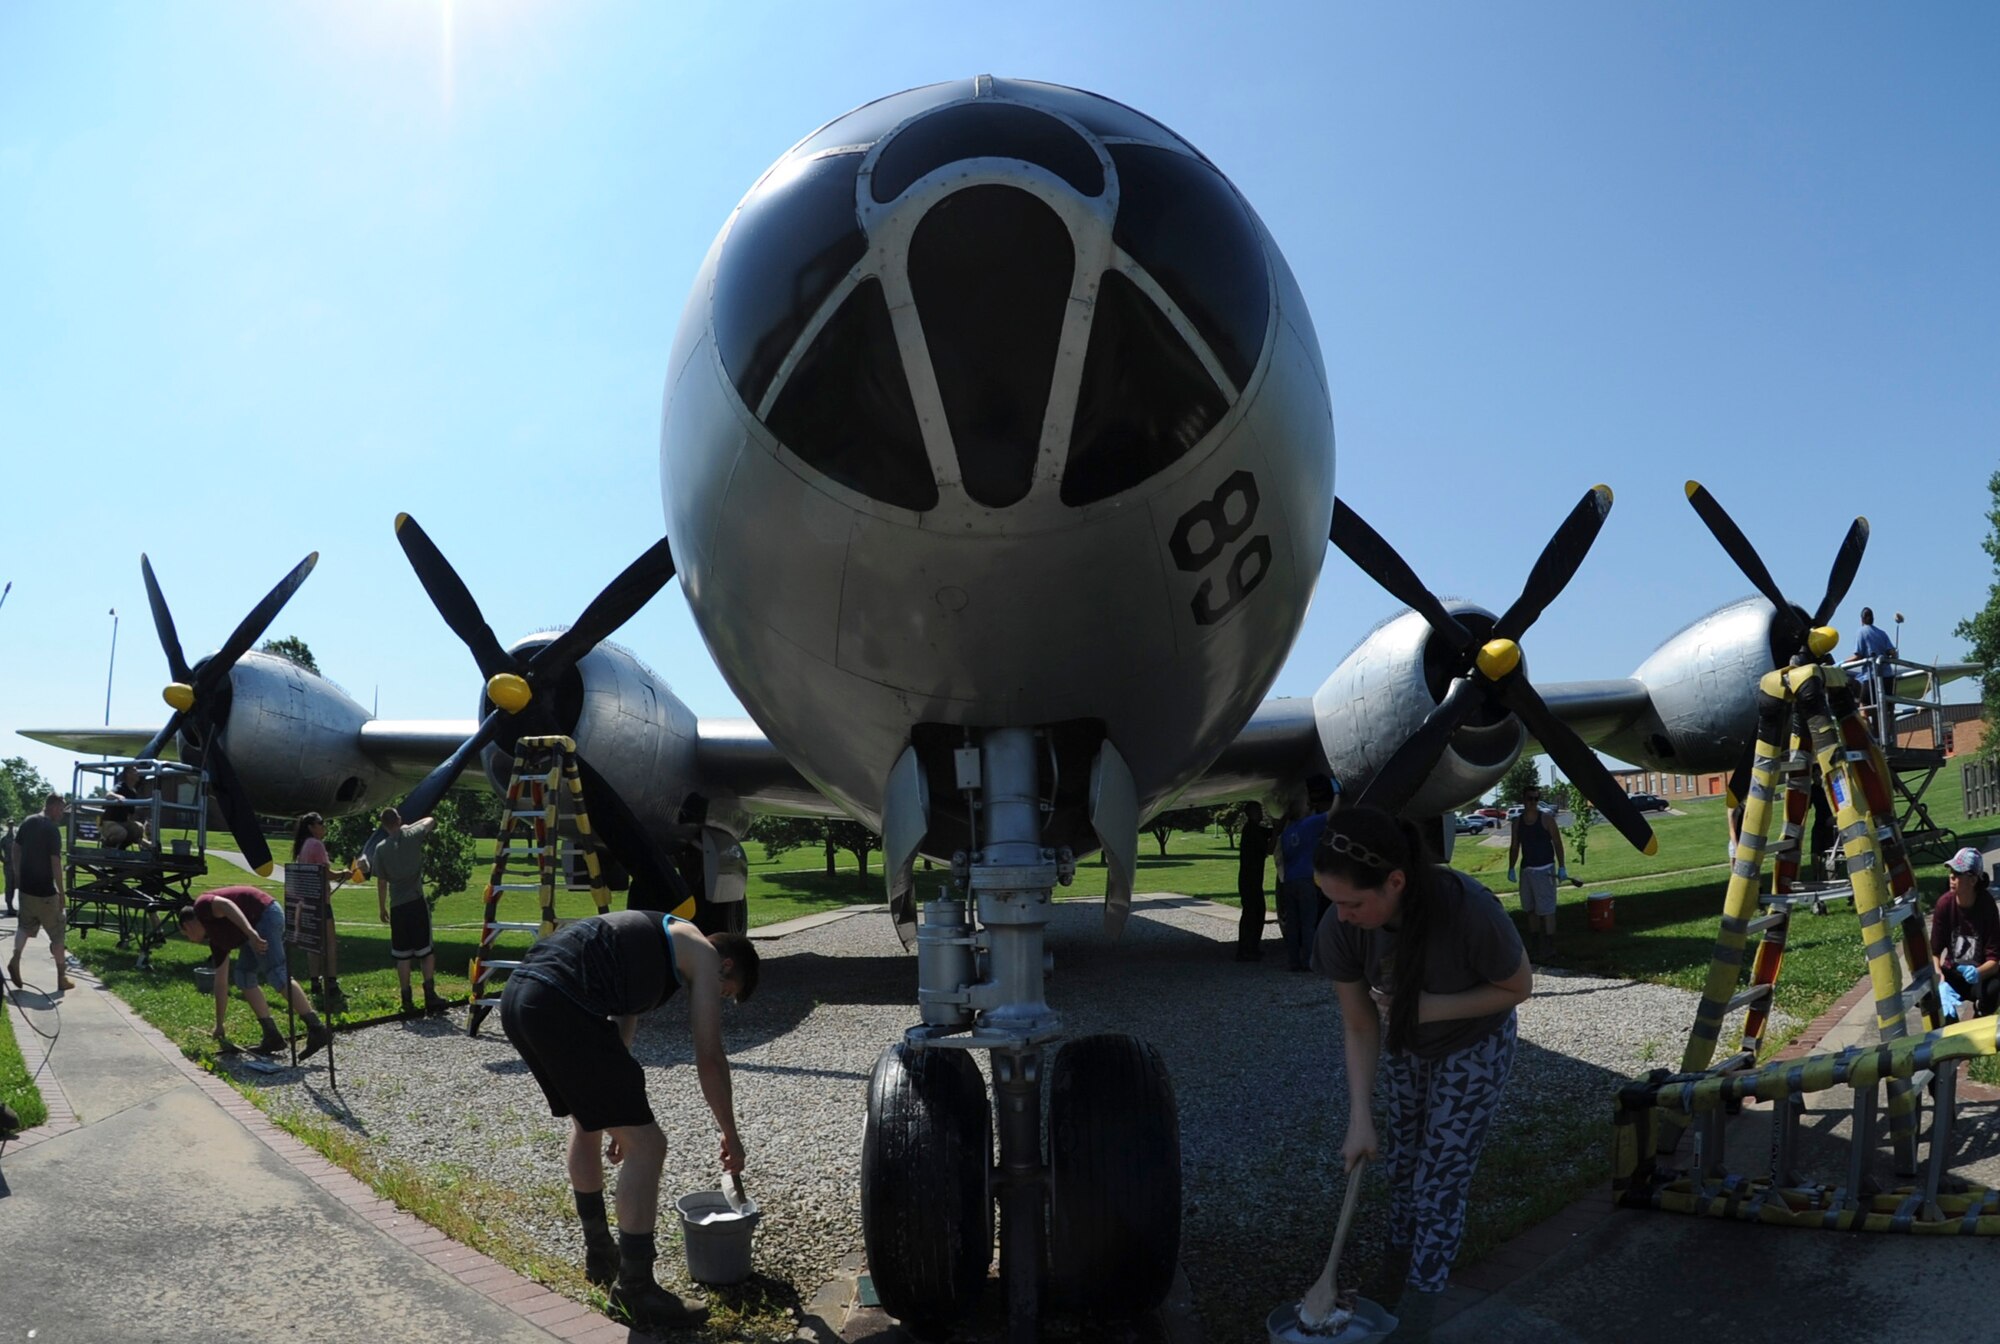 Members of the 509th Aircraft Maintenance Squadron wash the Boeing B-29 Superfortress static display at Whiteman Air Force Base, Mo., June 10, 2016. Under the United States Air Force Heritage Program at Whiteman, all static displays are adopted by at least one unit to be properly maintained. (U.S. Air Force photo by Senior Airman Danielle Quilla)